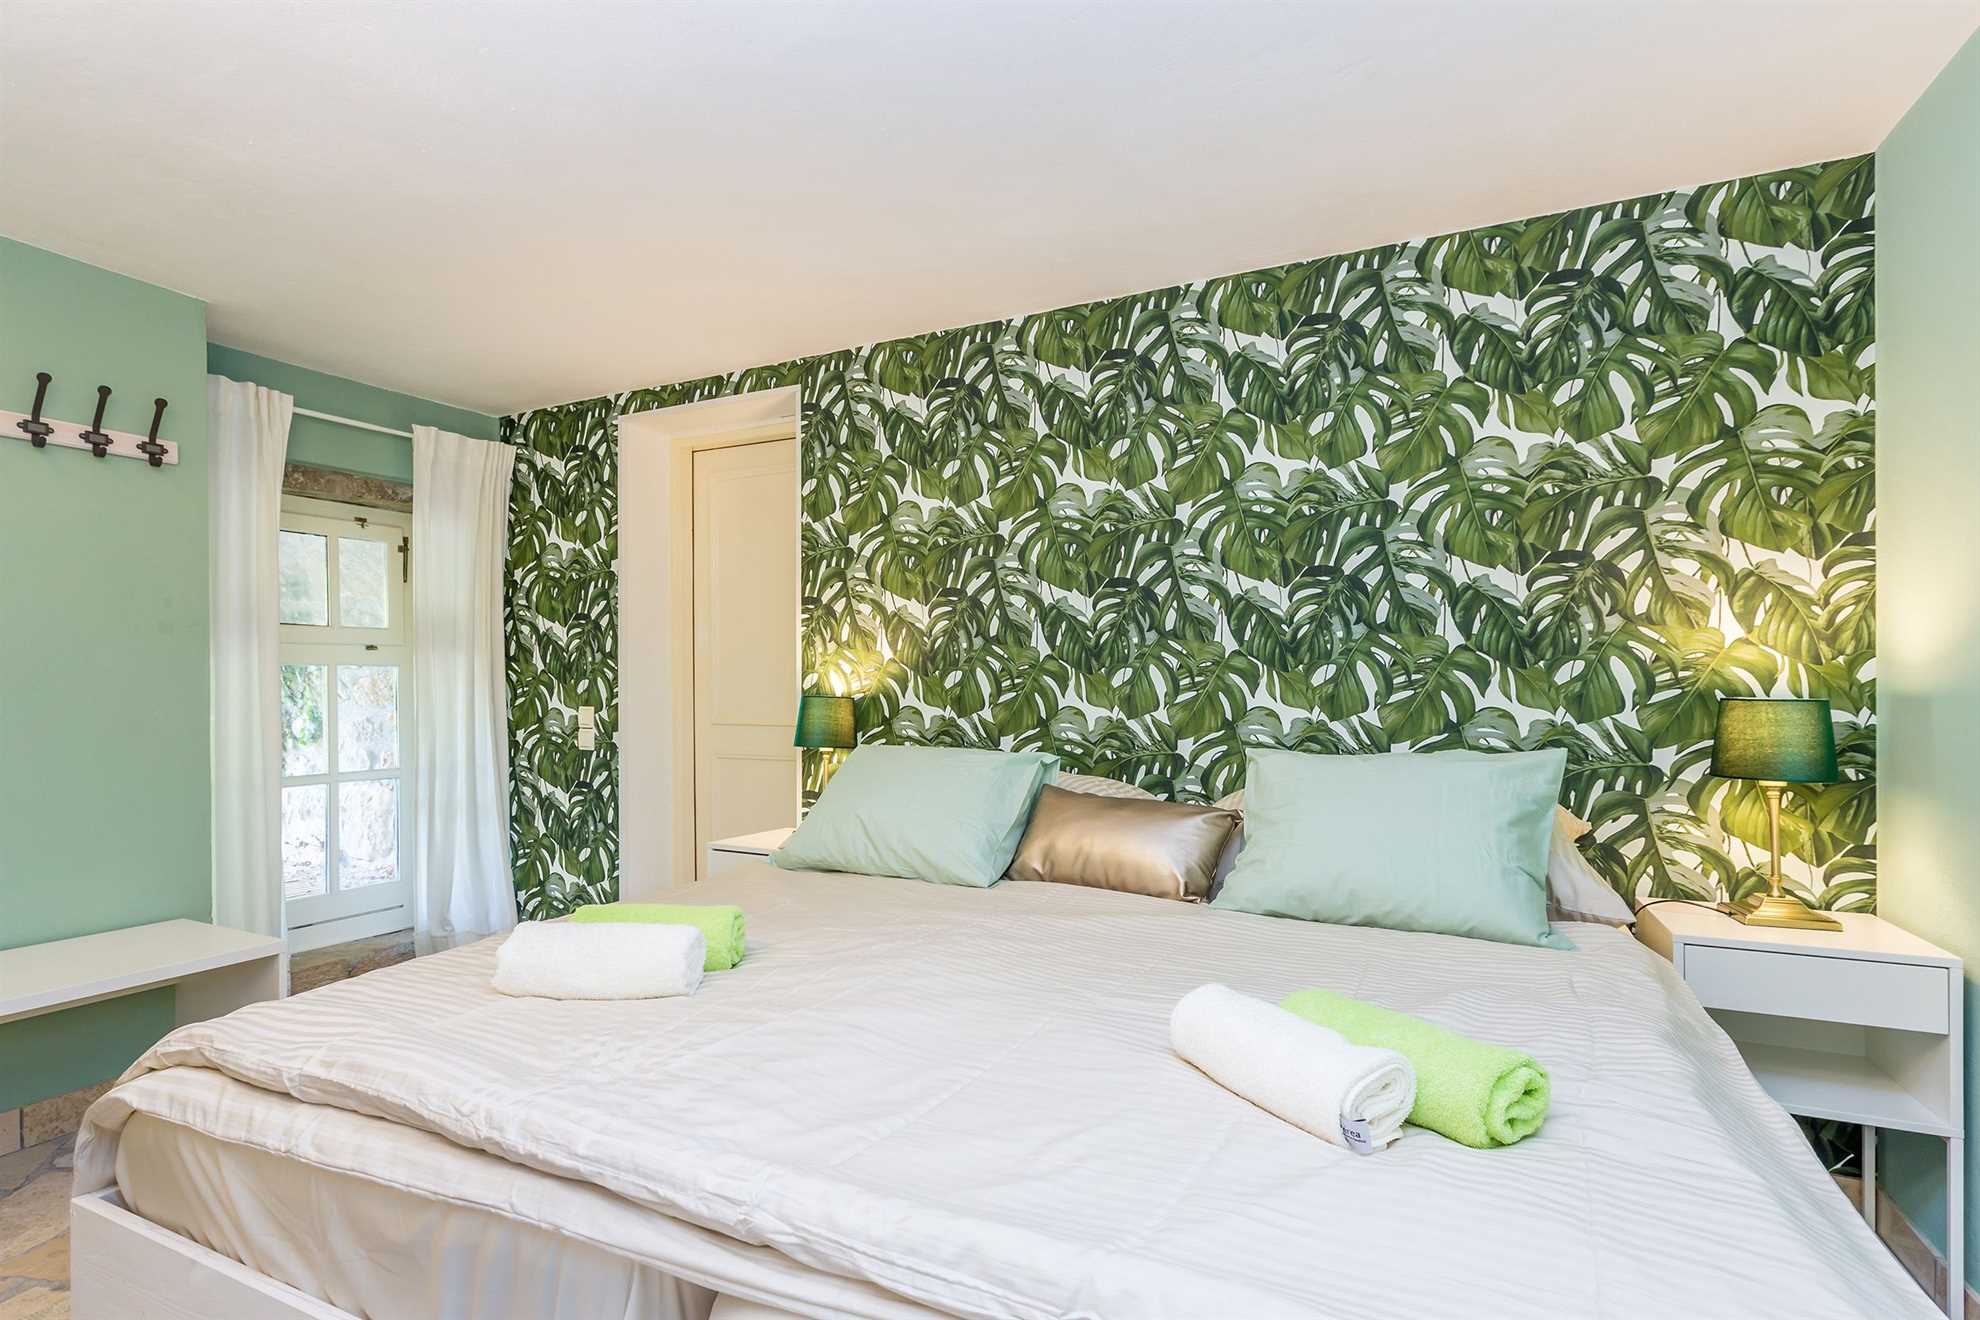 Bedroom with green leaf-shaped wallpapers and a large bed adorned with pillows and towels.